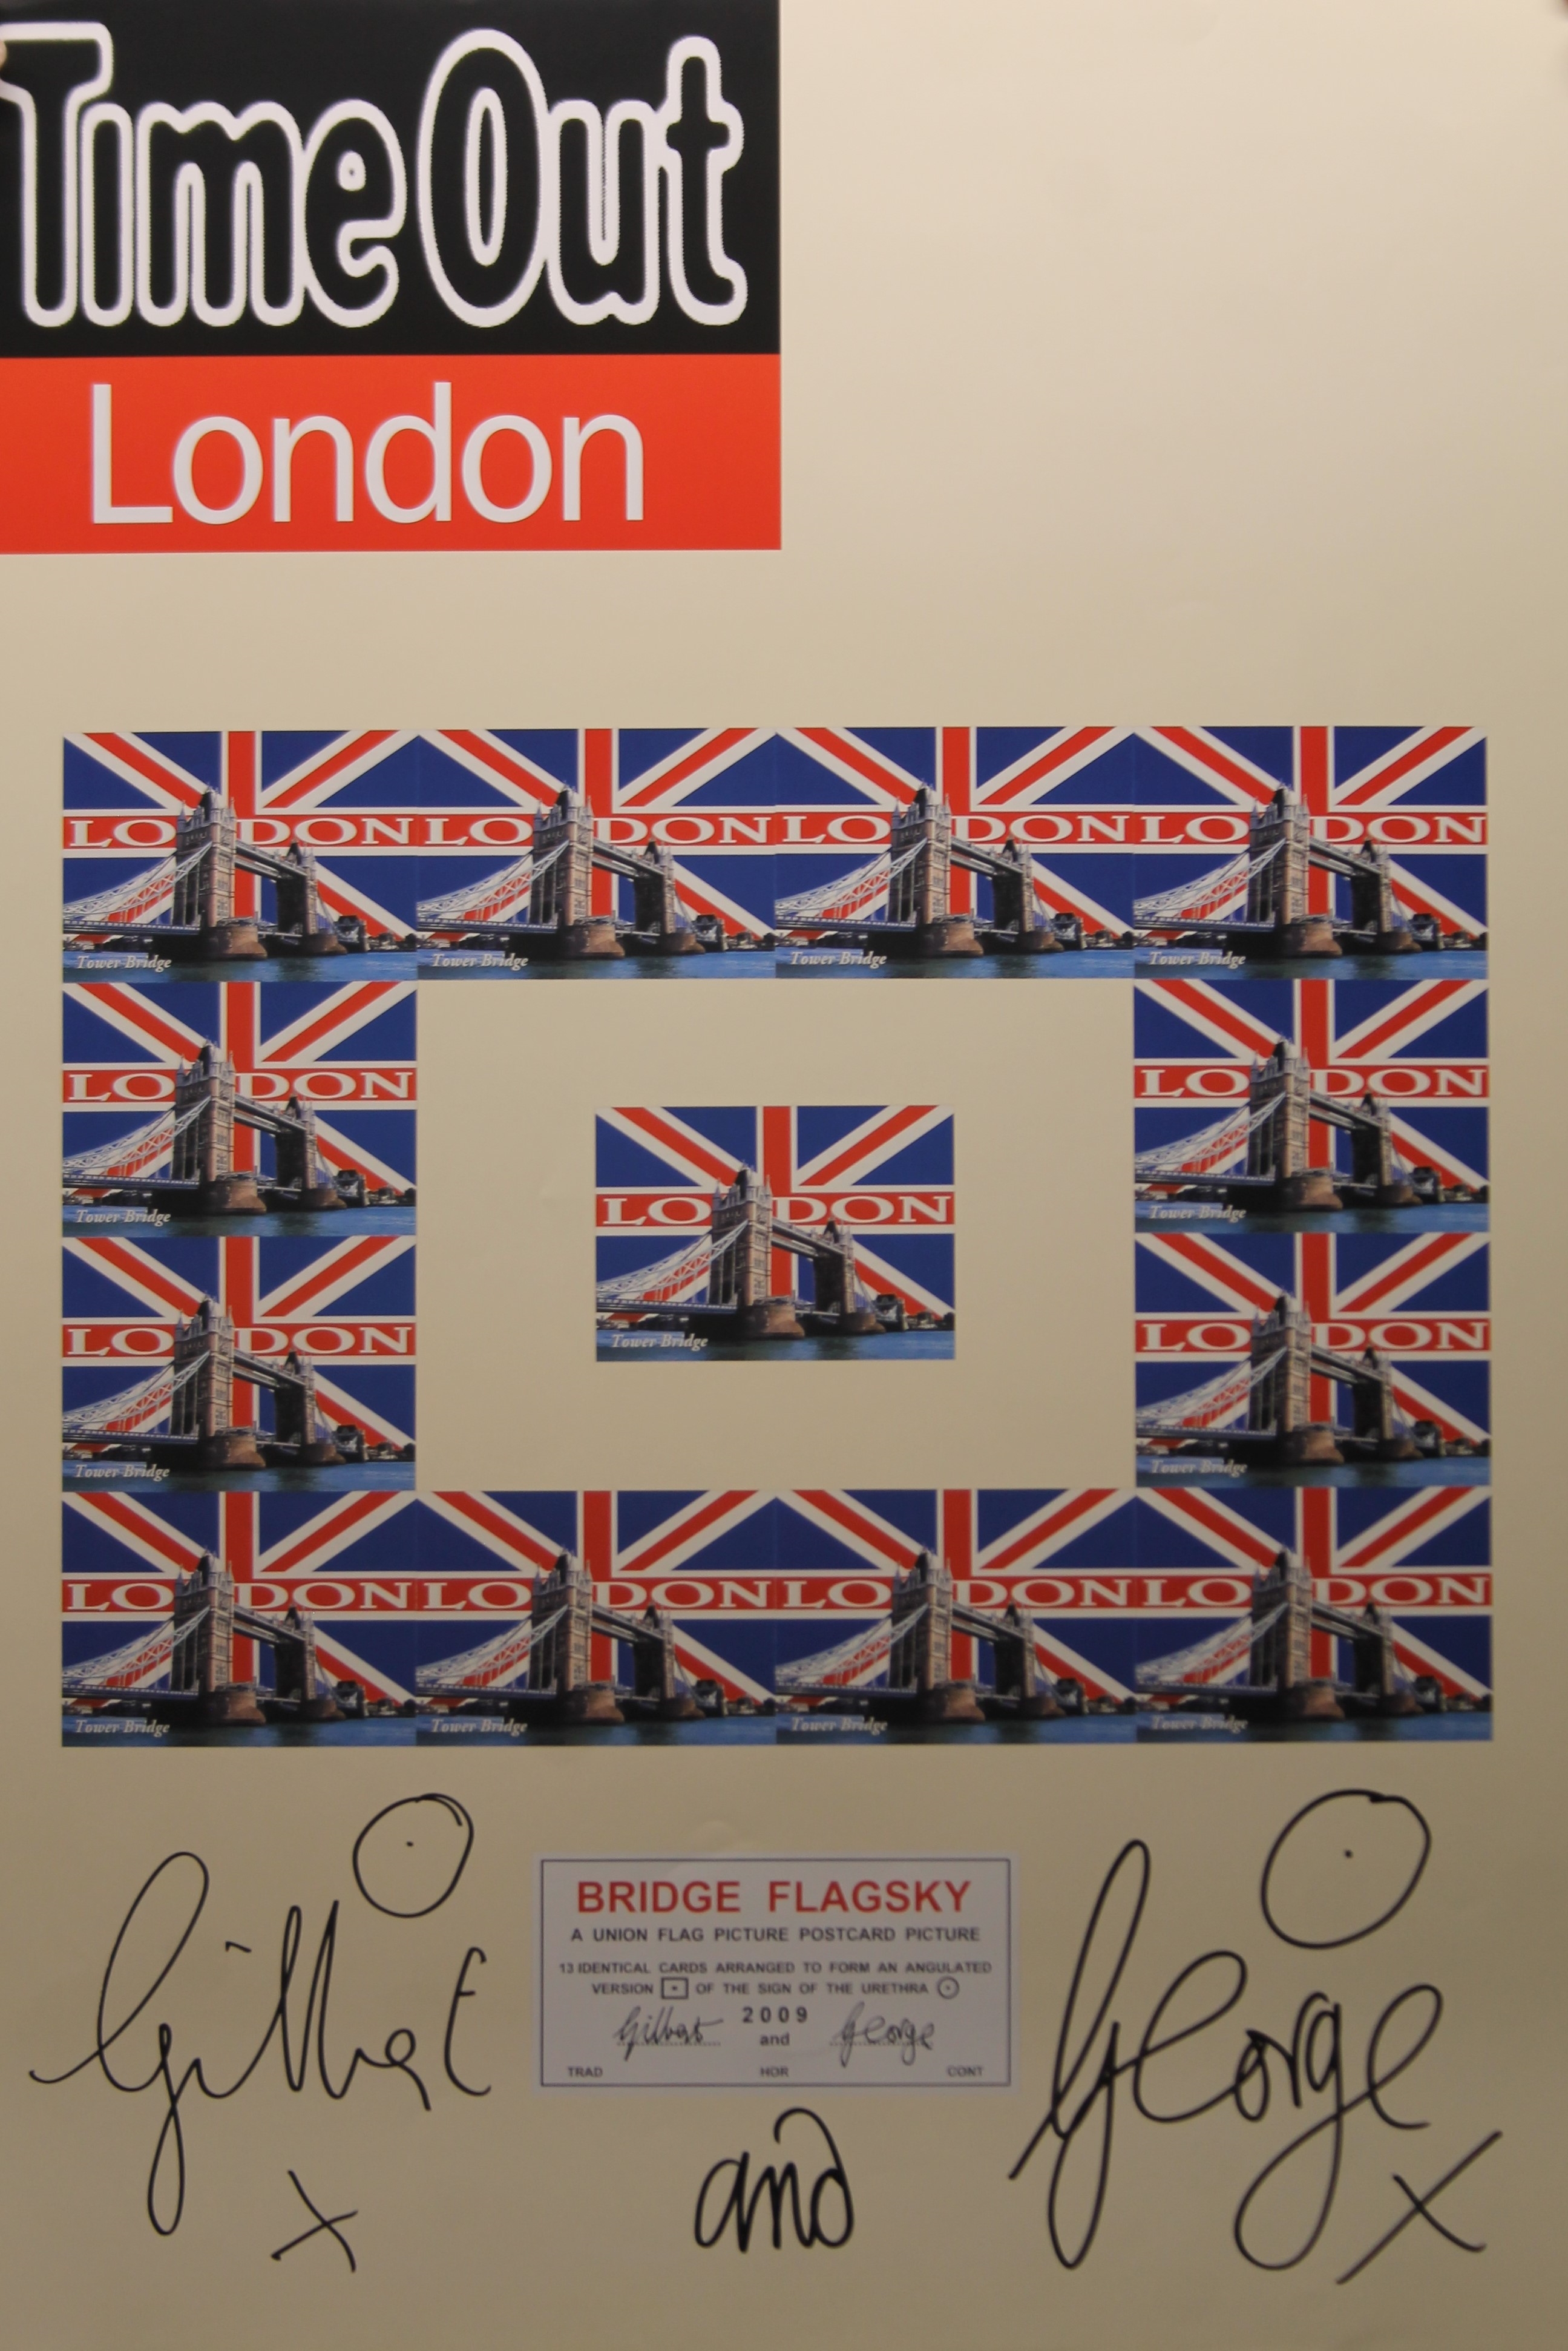 GILBERT & GEORGE (born 1943) Italian and (1942) British (AR), a signed Time Out London poster (limited edition of 500), signed by both artists - Gilbert & George